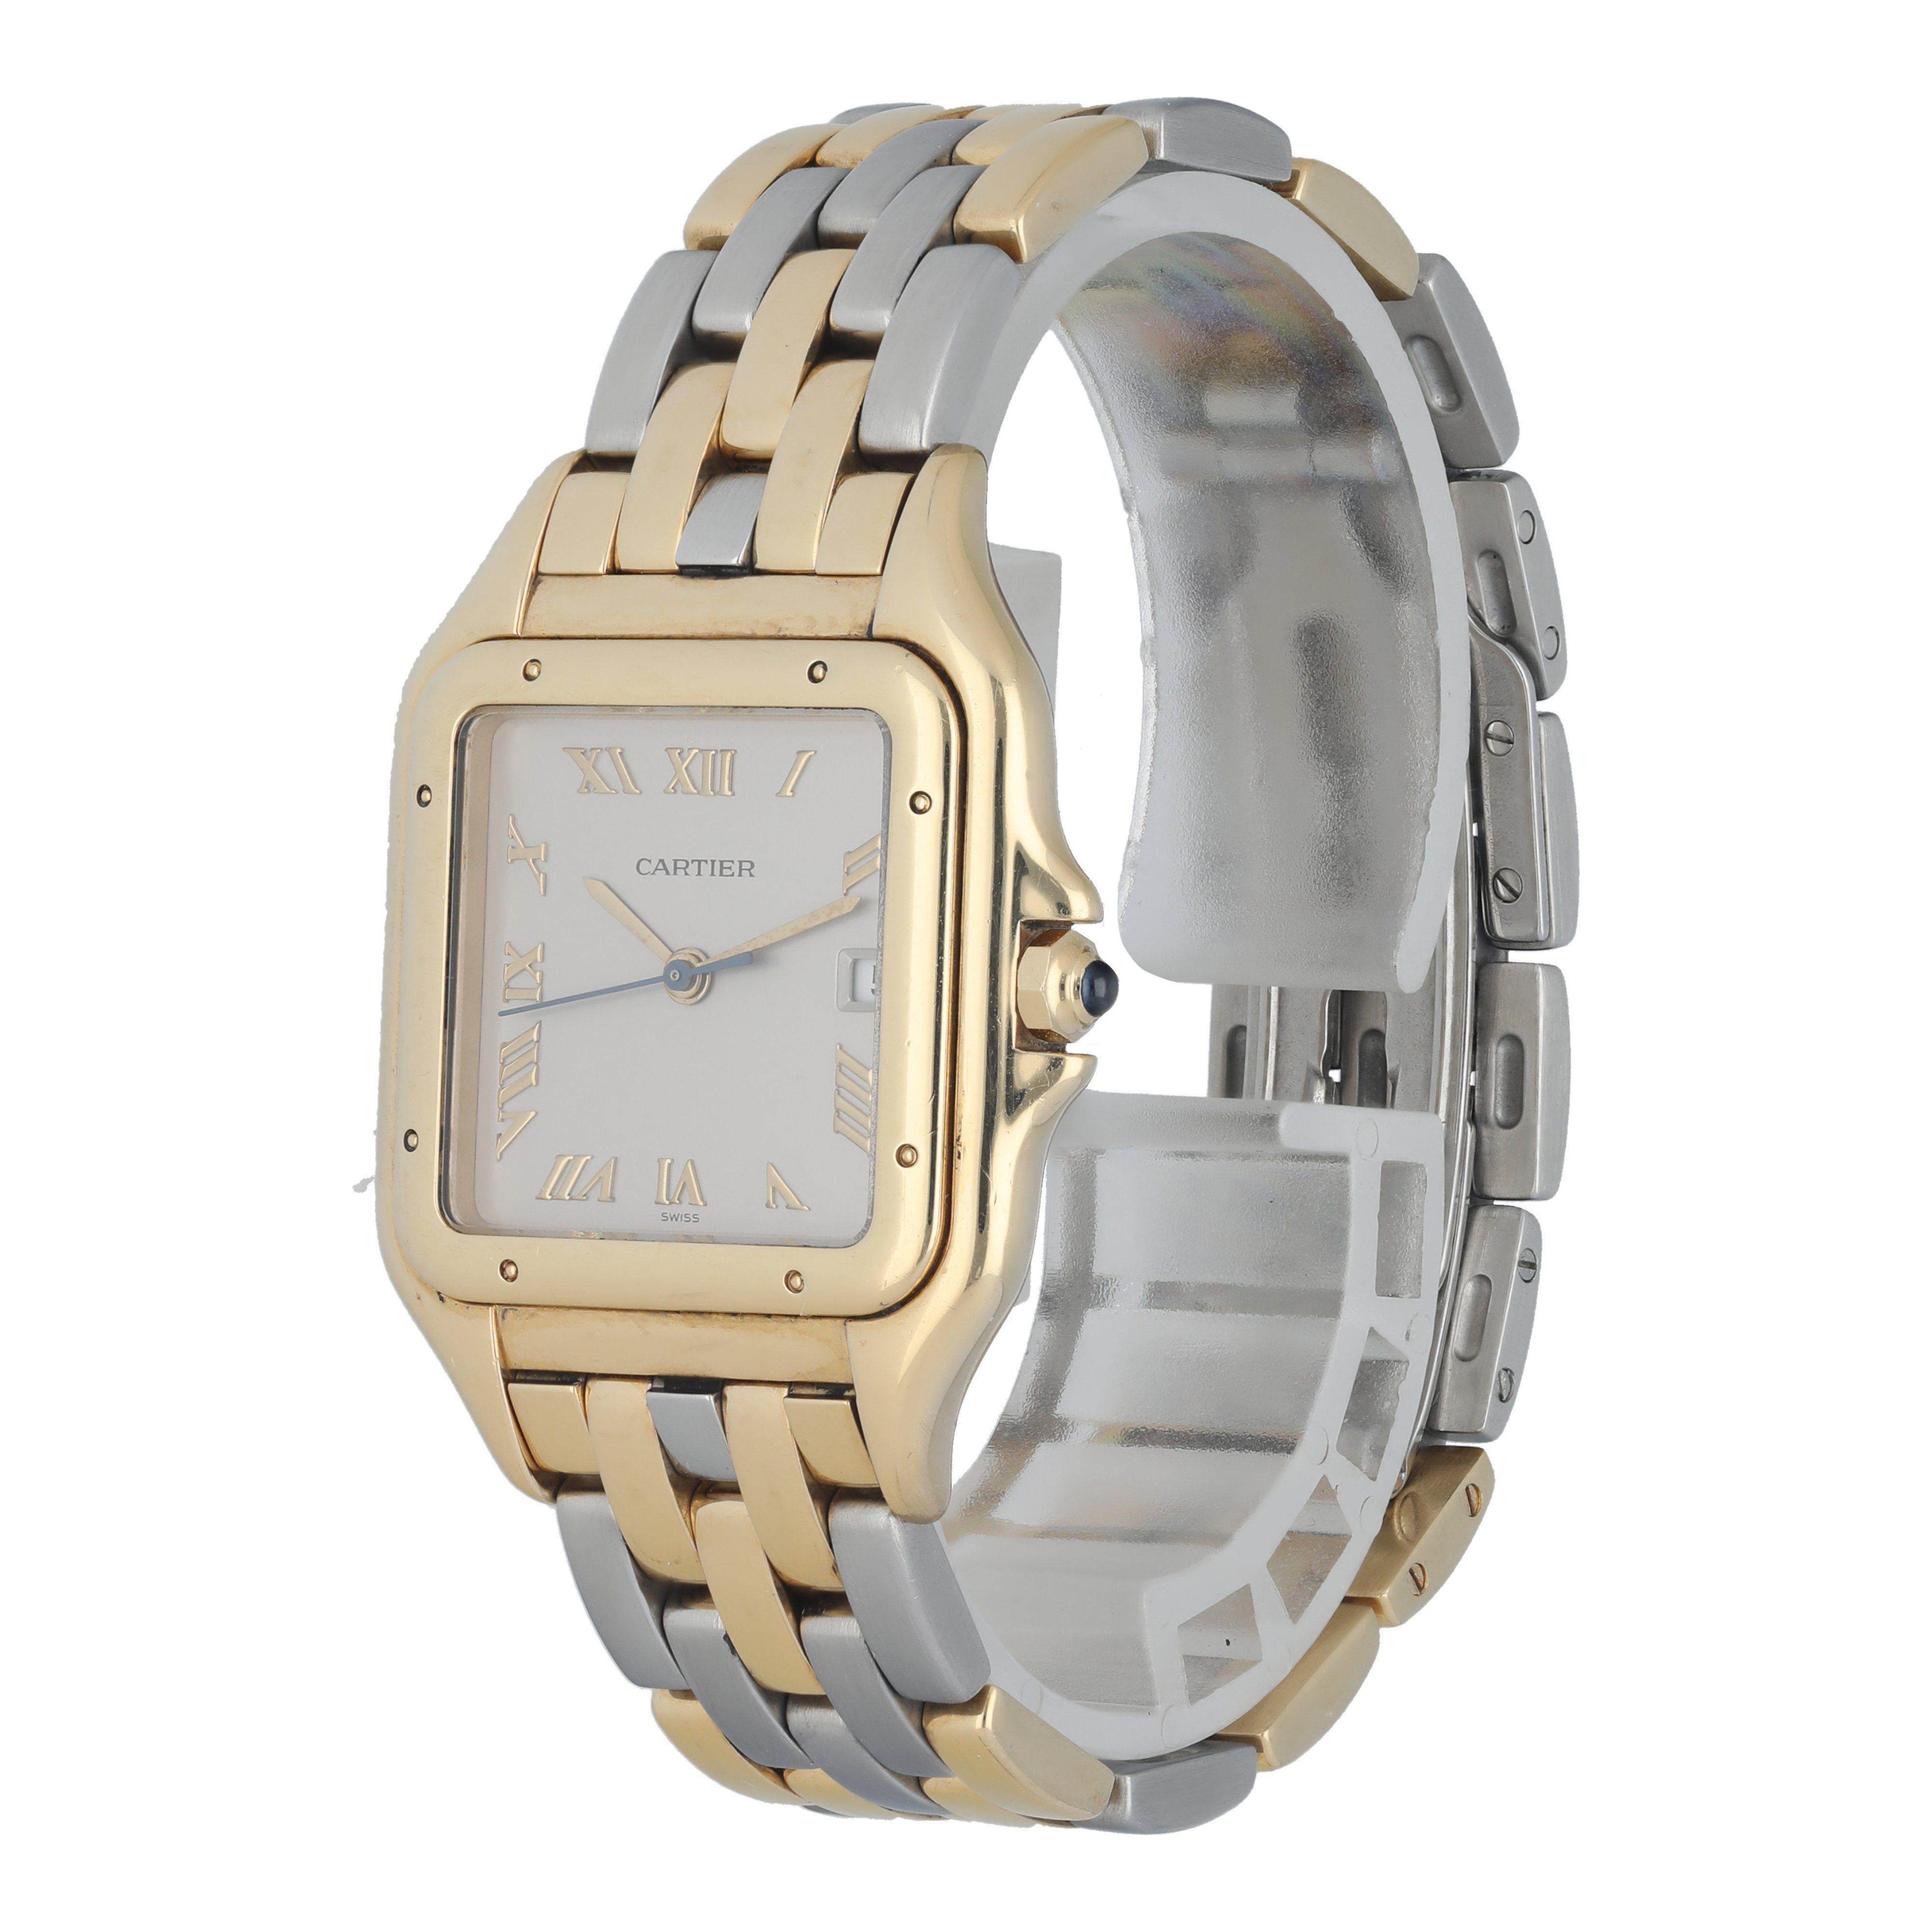  Cartier Panthere Large 1060 2 Two-tone Watch. 
 29mm 18k Yellow gold case and bezel. 
 Grey dial with Blue steel and yellow gold hands, gold Roman numeral hour markers. 
 Date display at the 3 o'clock position. 
 Two-tone Yellow Gold and stainless